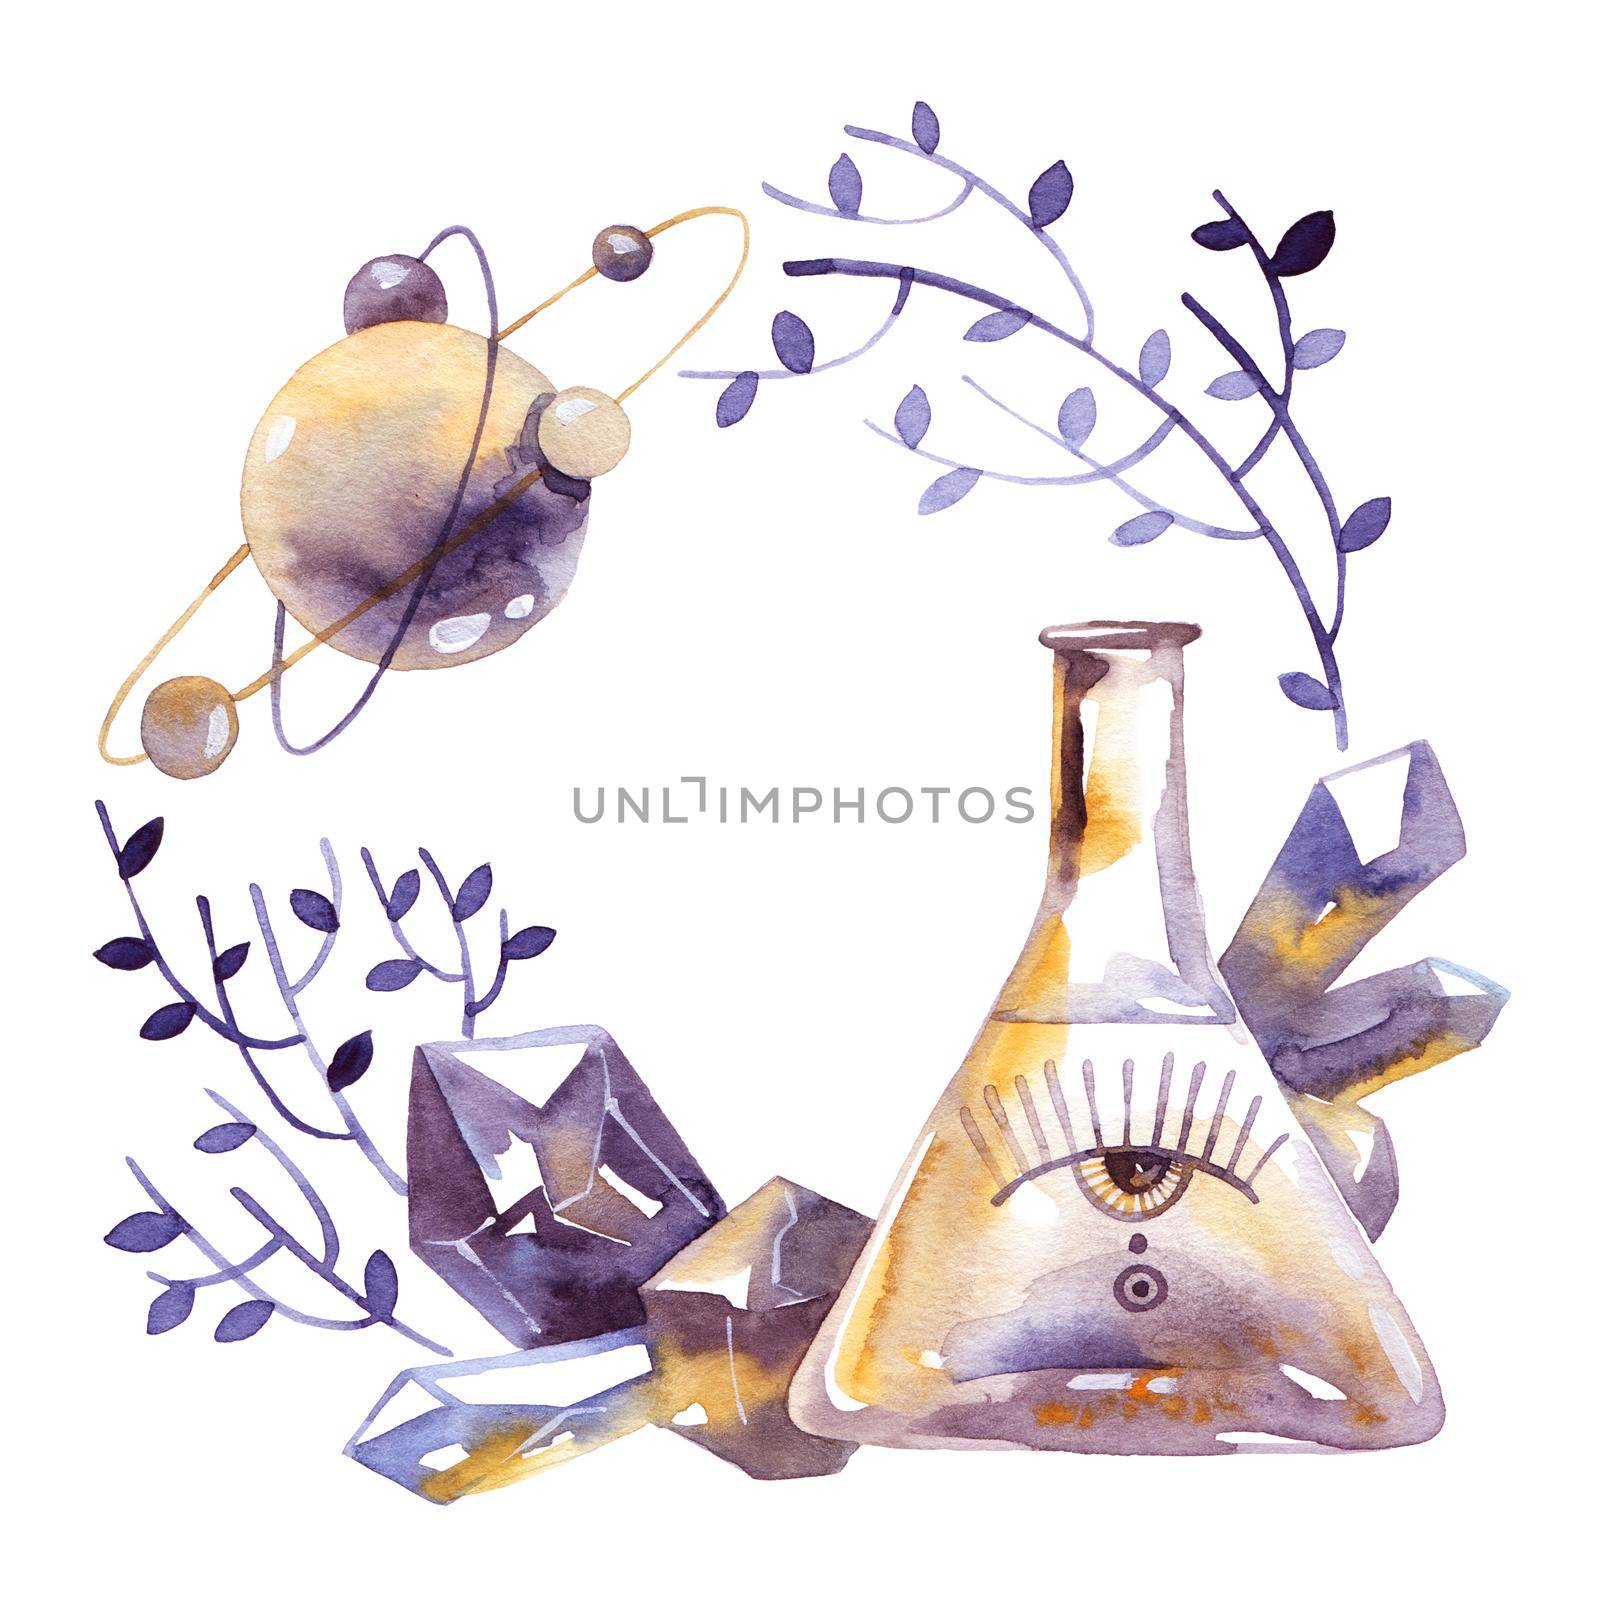 Watercolor illustration in vintage style of alchemy objects - vial, all-seeing eye, crystals, planet system, leaves. Decorative frame on white background.